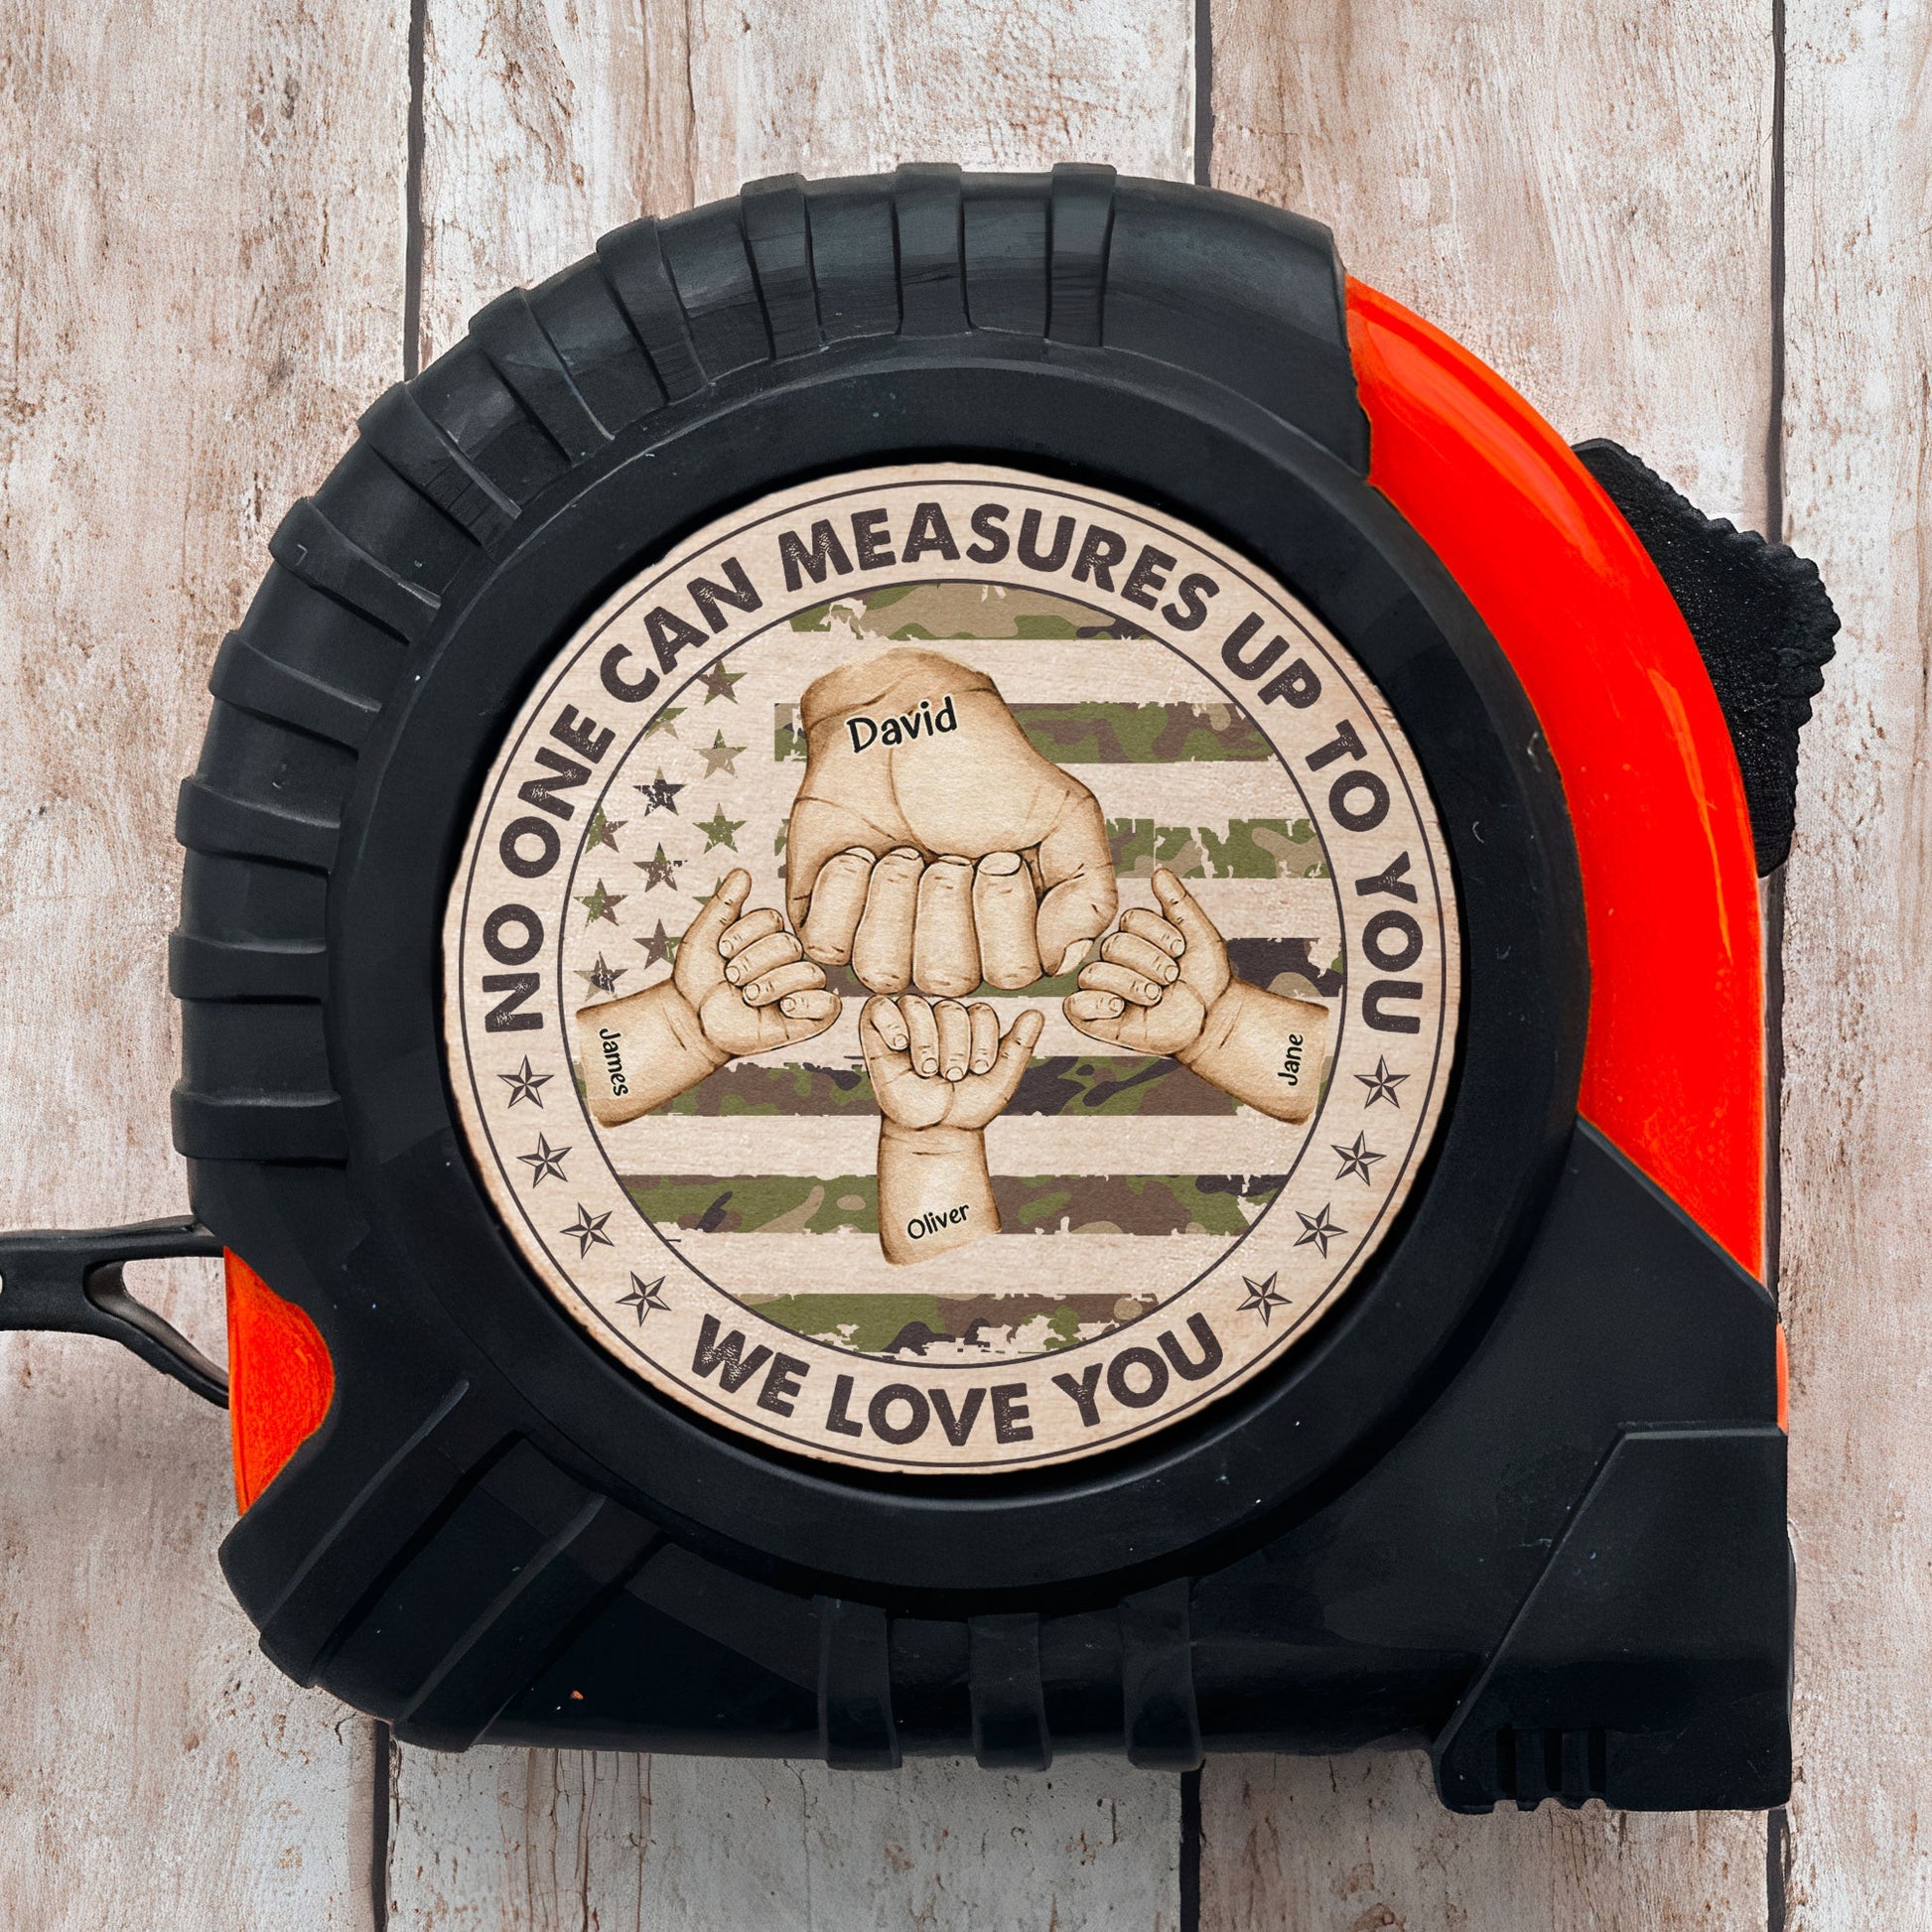 No One Can Measures Up To You - Personalized Tape Measure